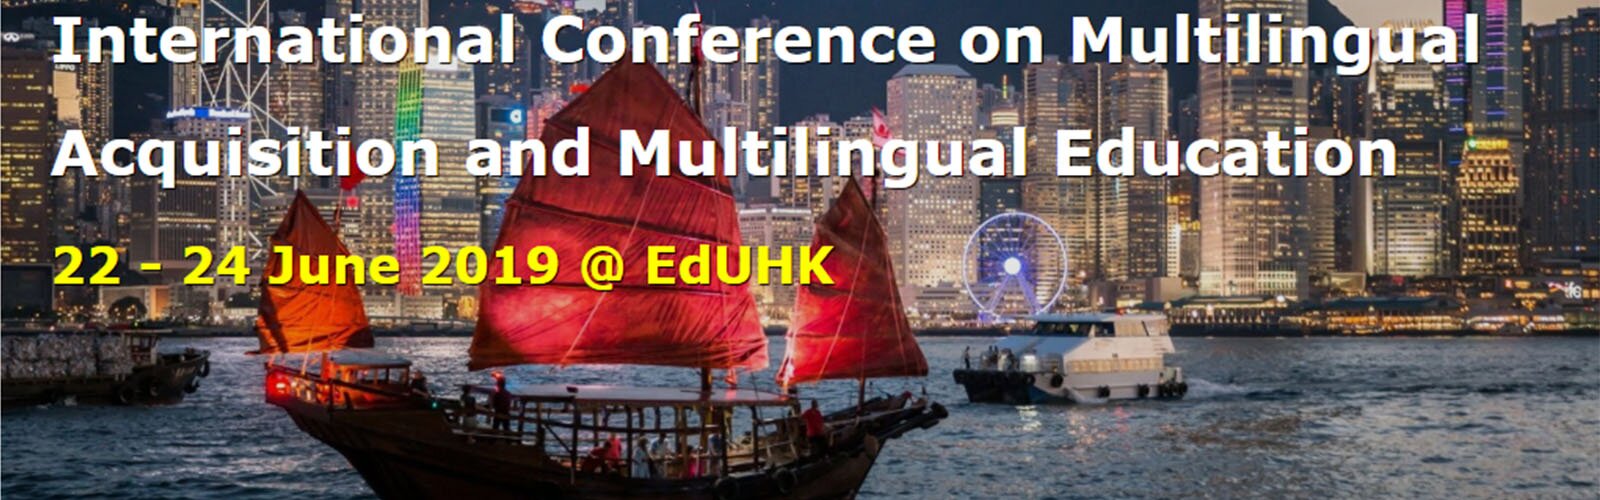 The International Conference on Multilingual Acquisition and Multilingual Education